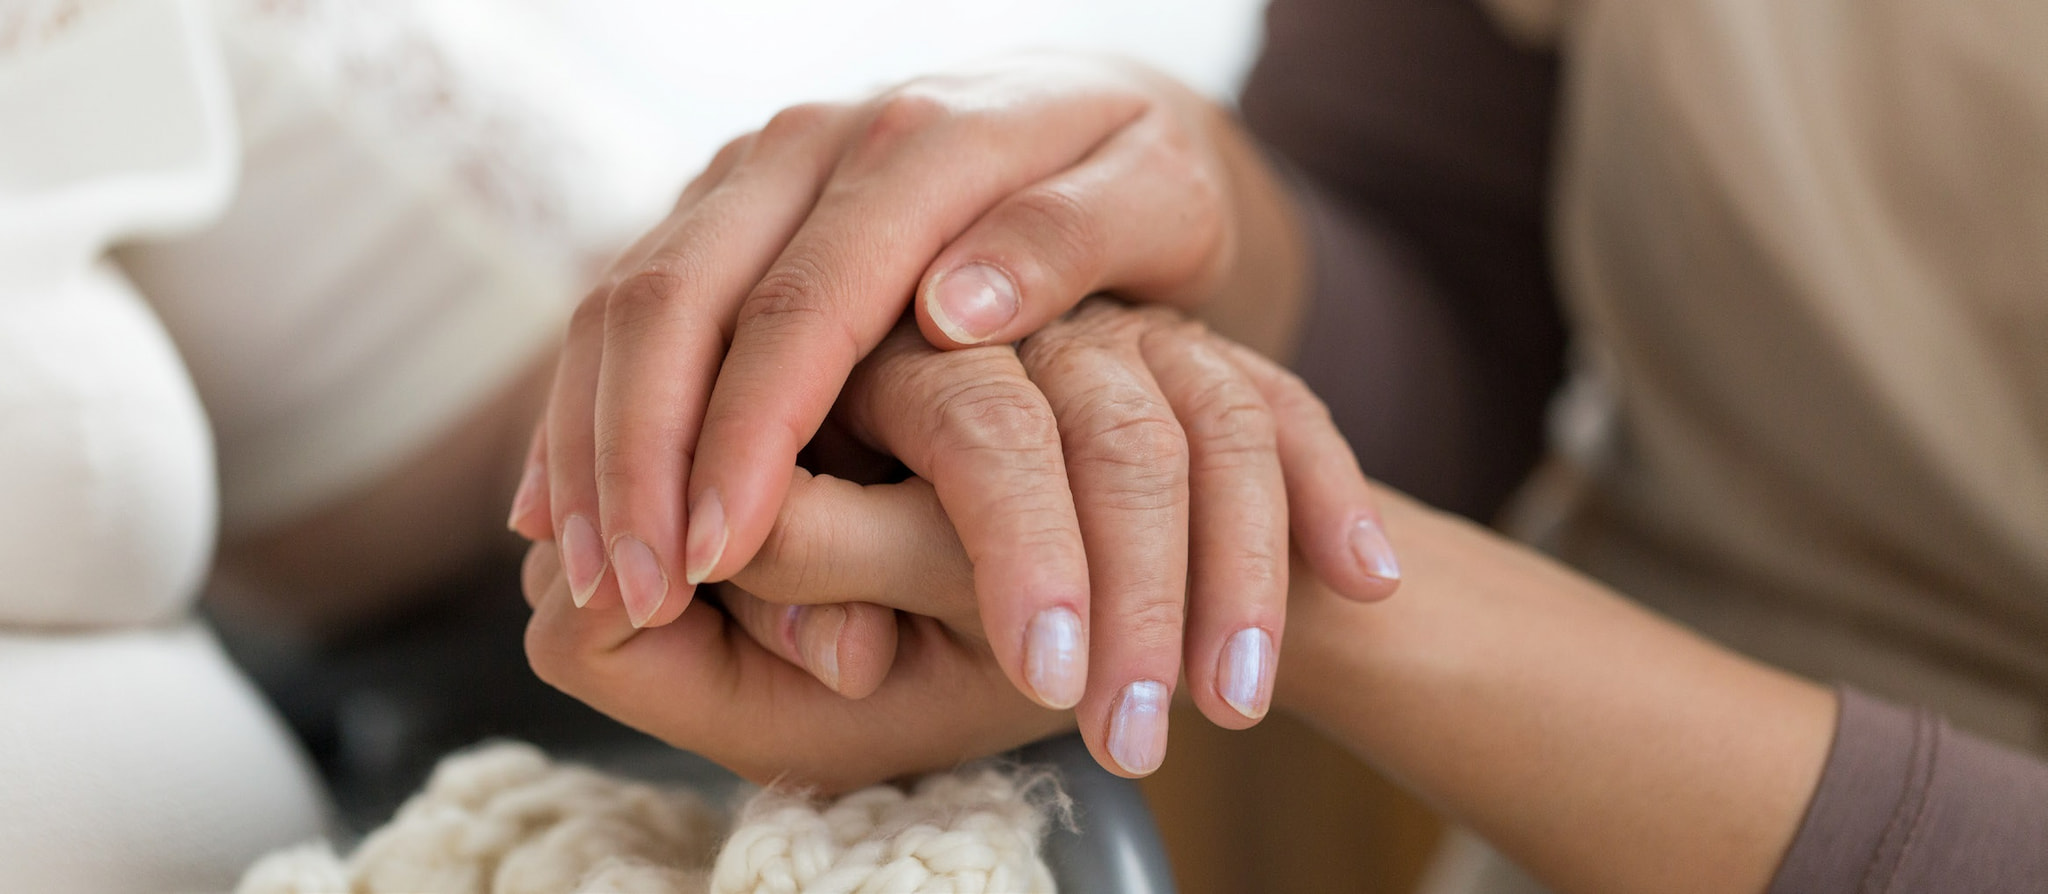 hospice woman holding elderly woman's hands